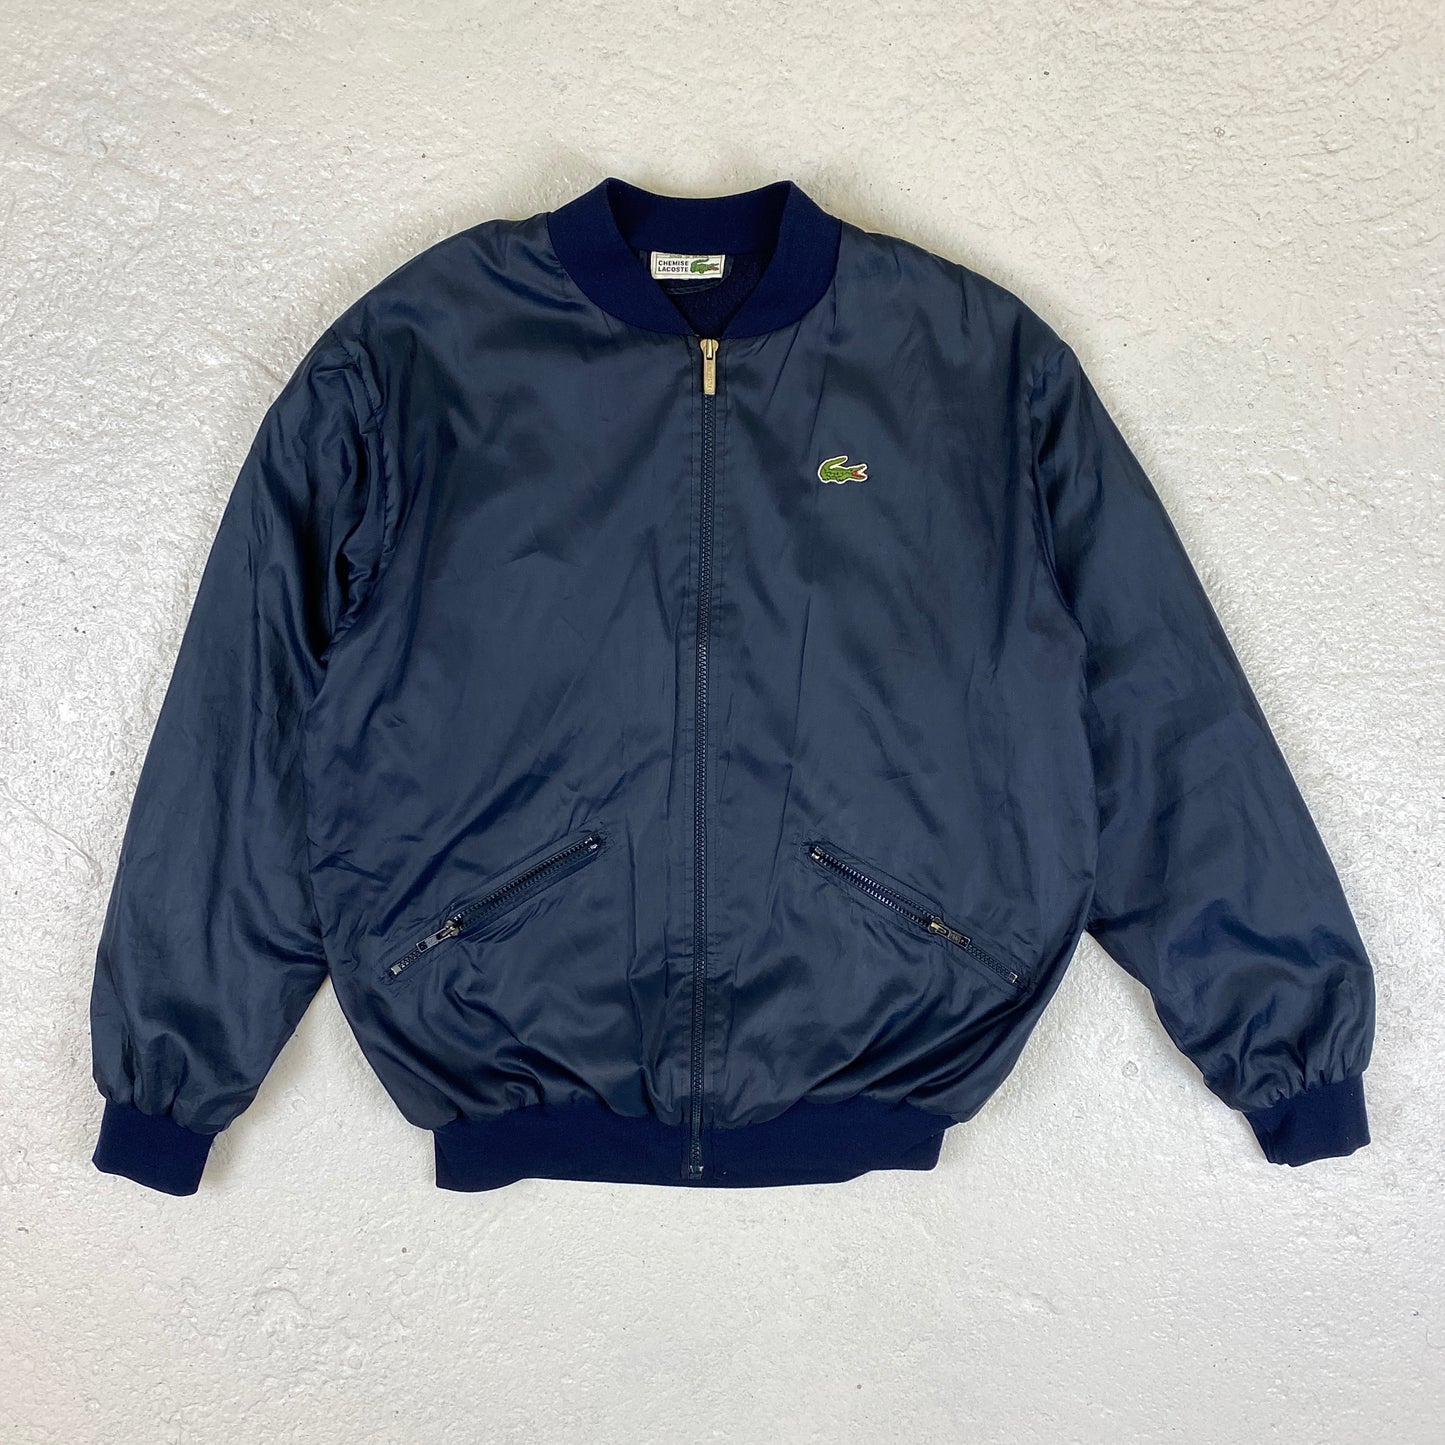 Lacoste embroidered jacket (M)